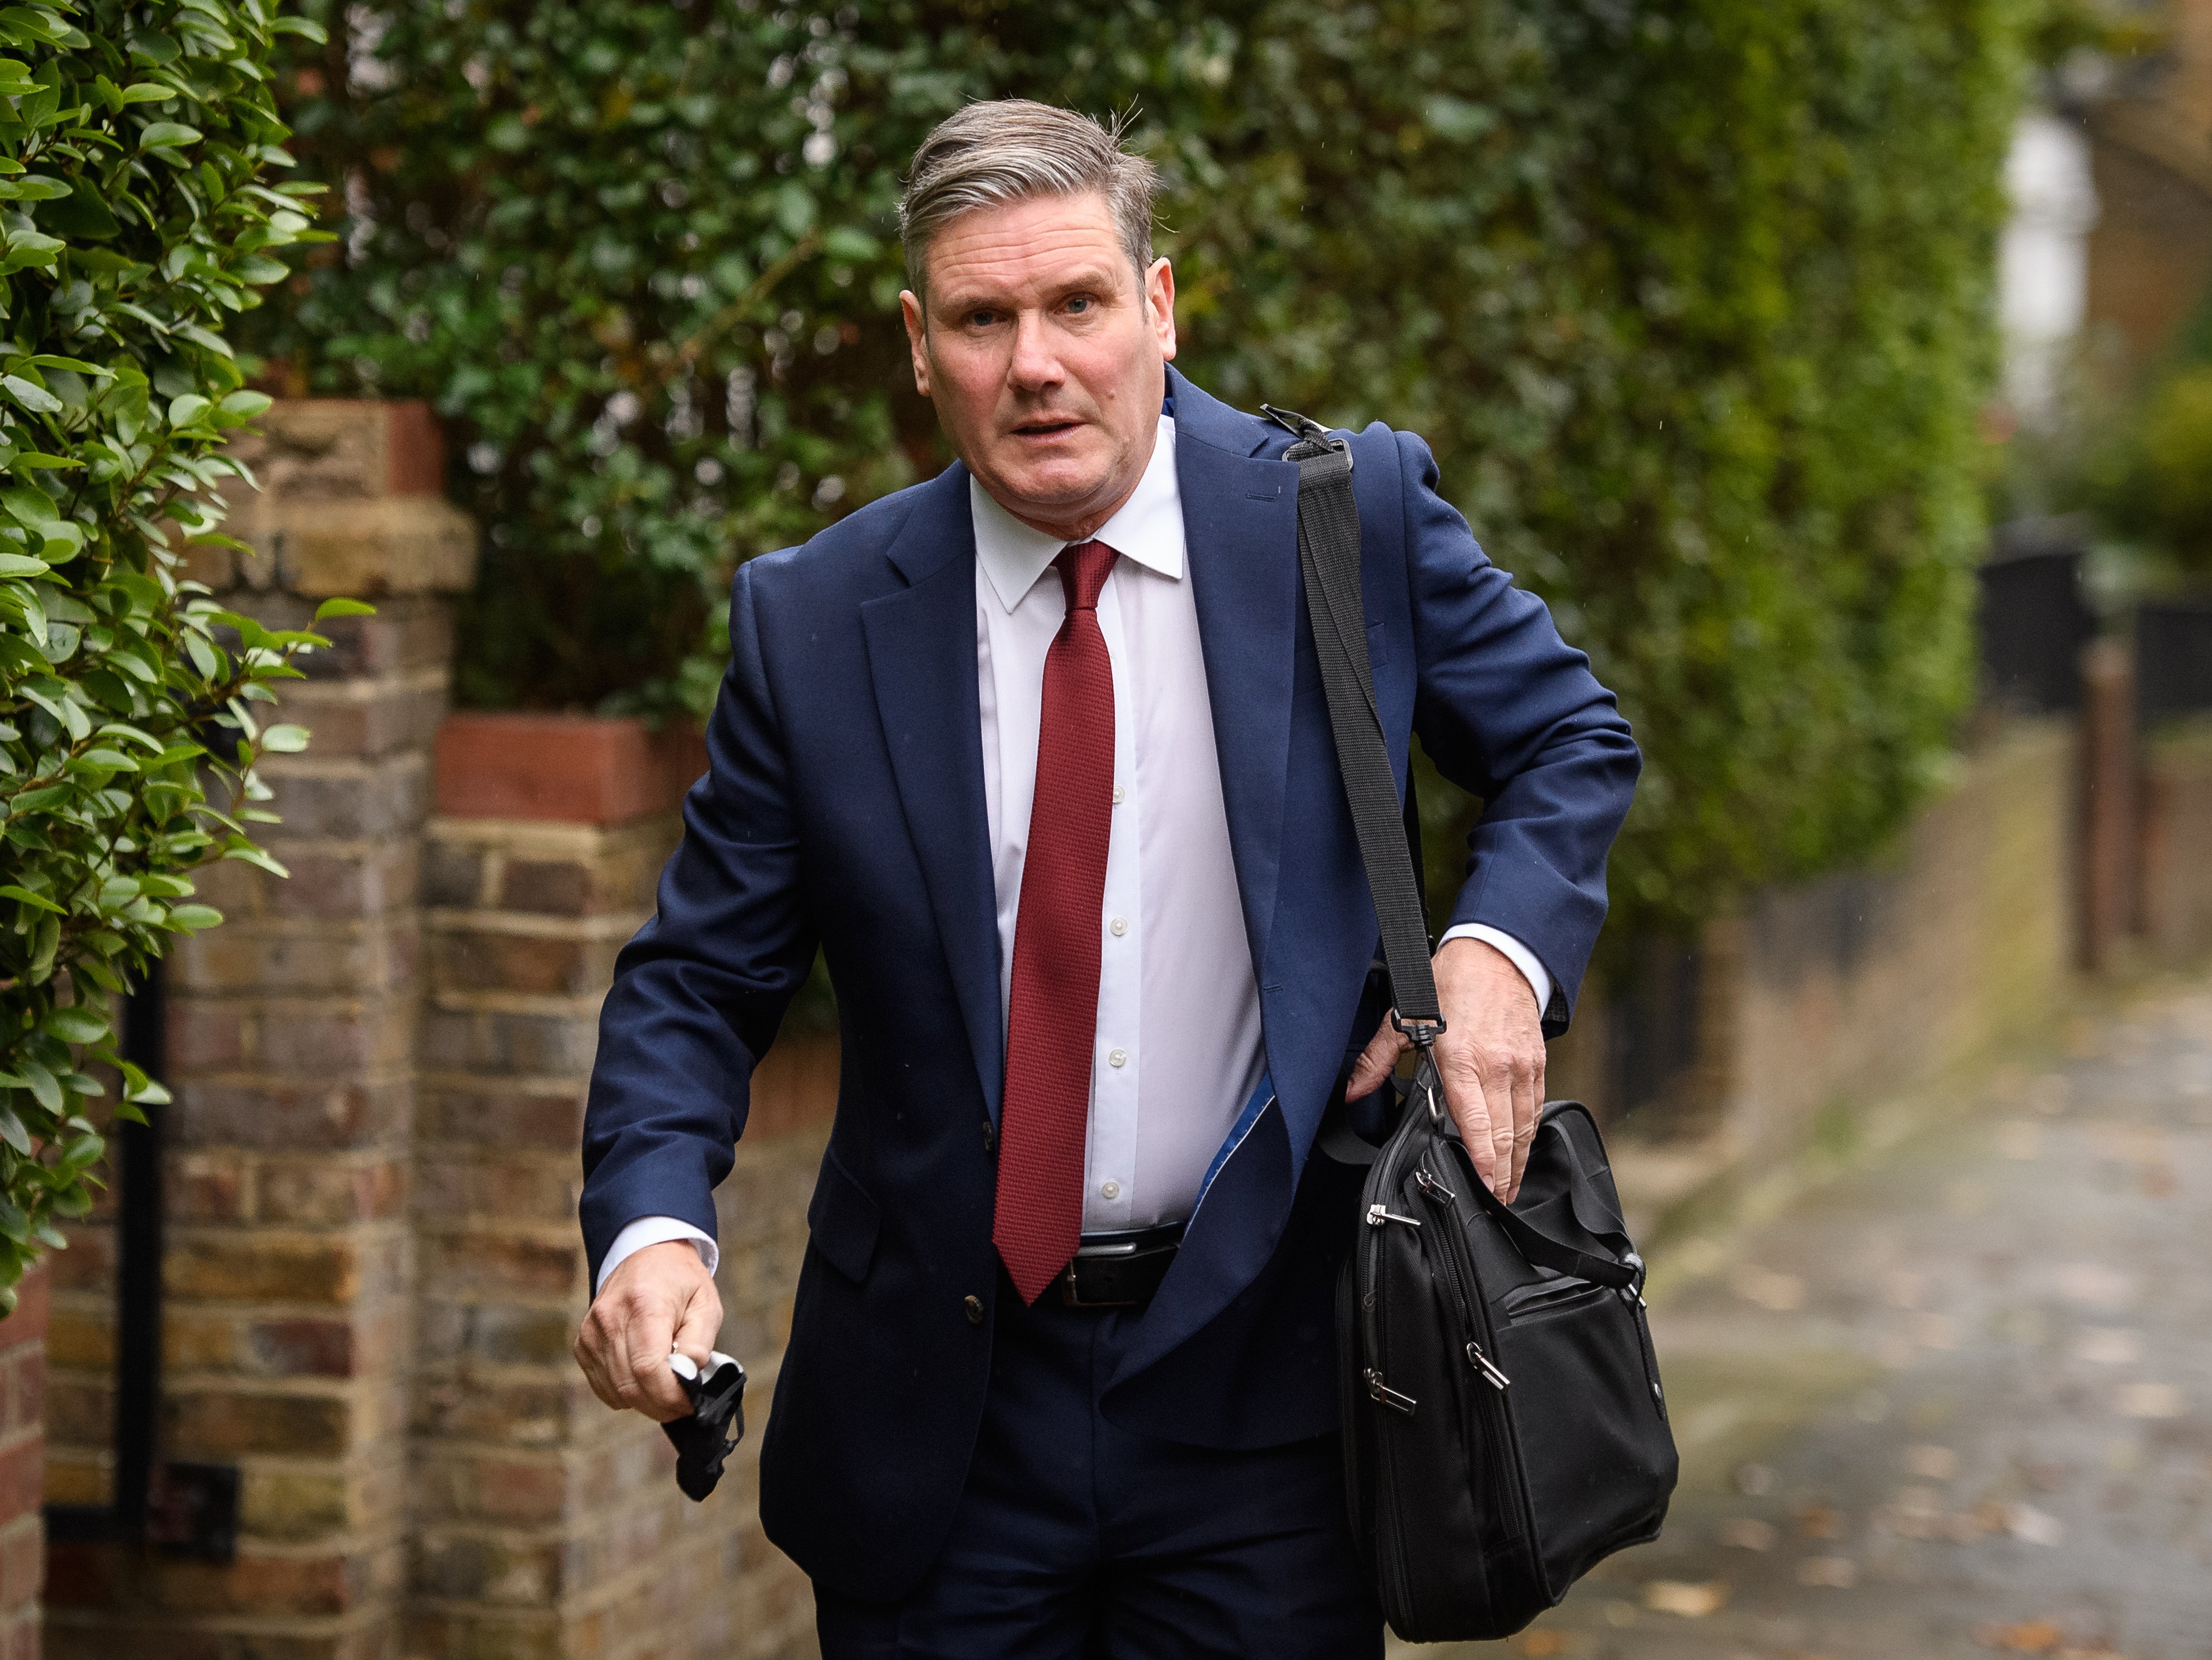 Keir Starmer faces a test from some in his party